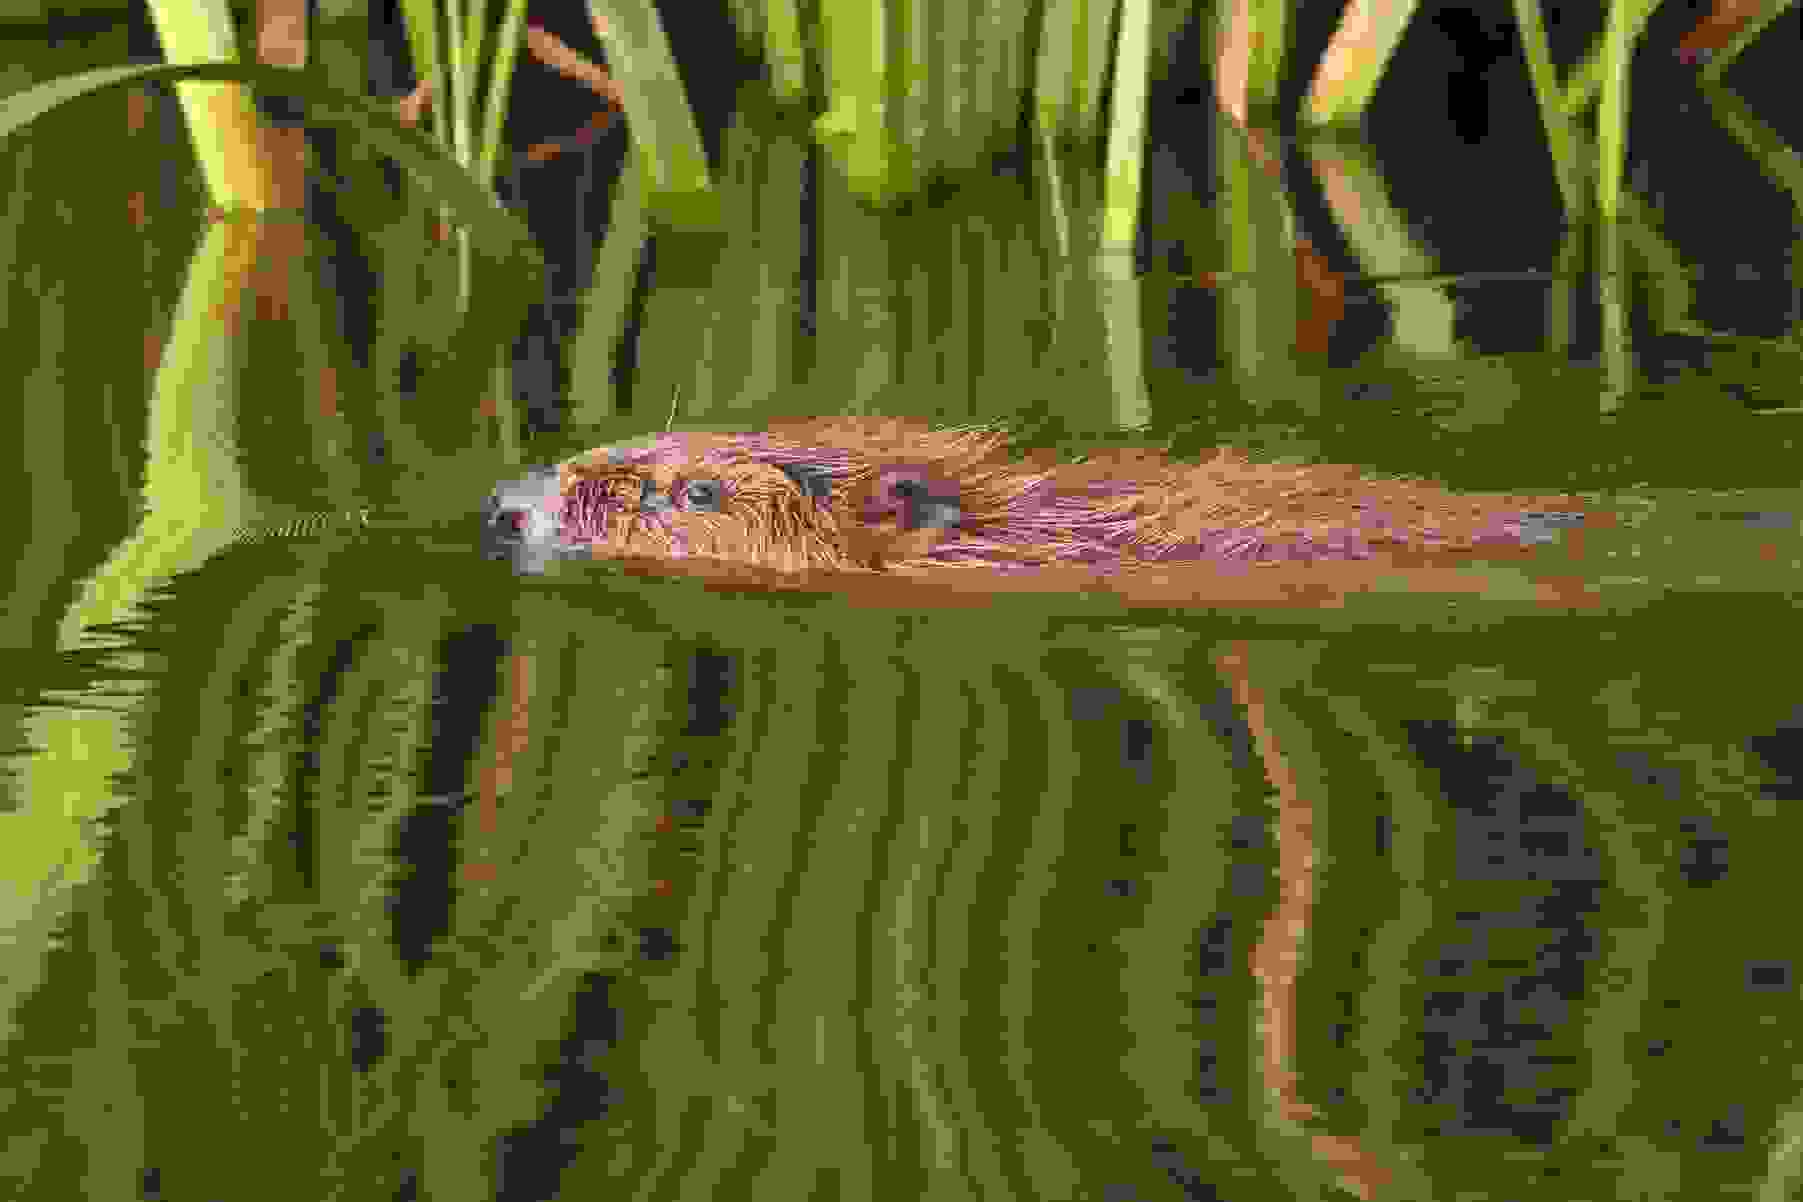 A female beaver swimming in green water with reeds behind